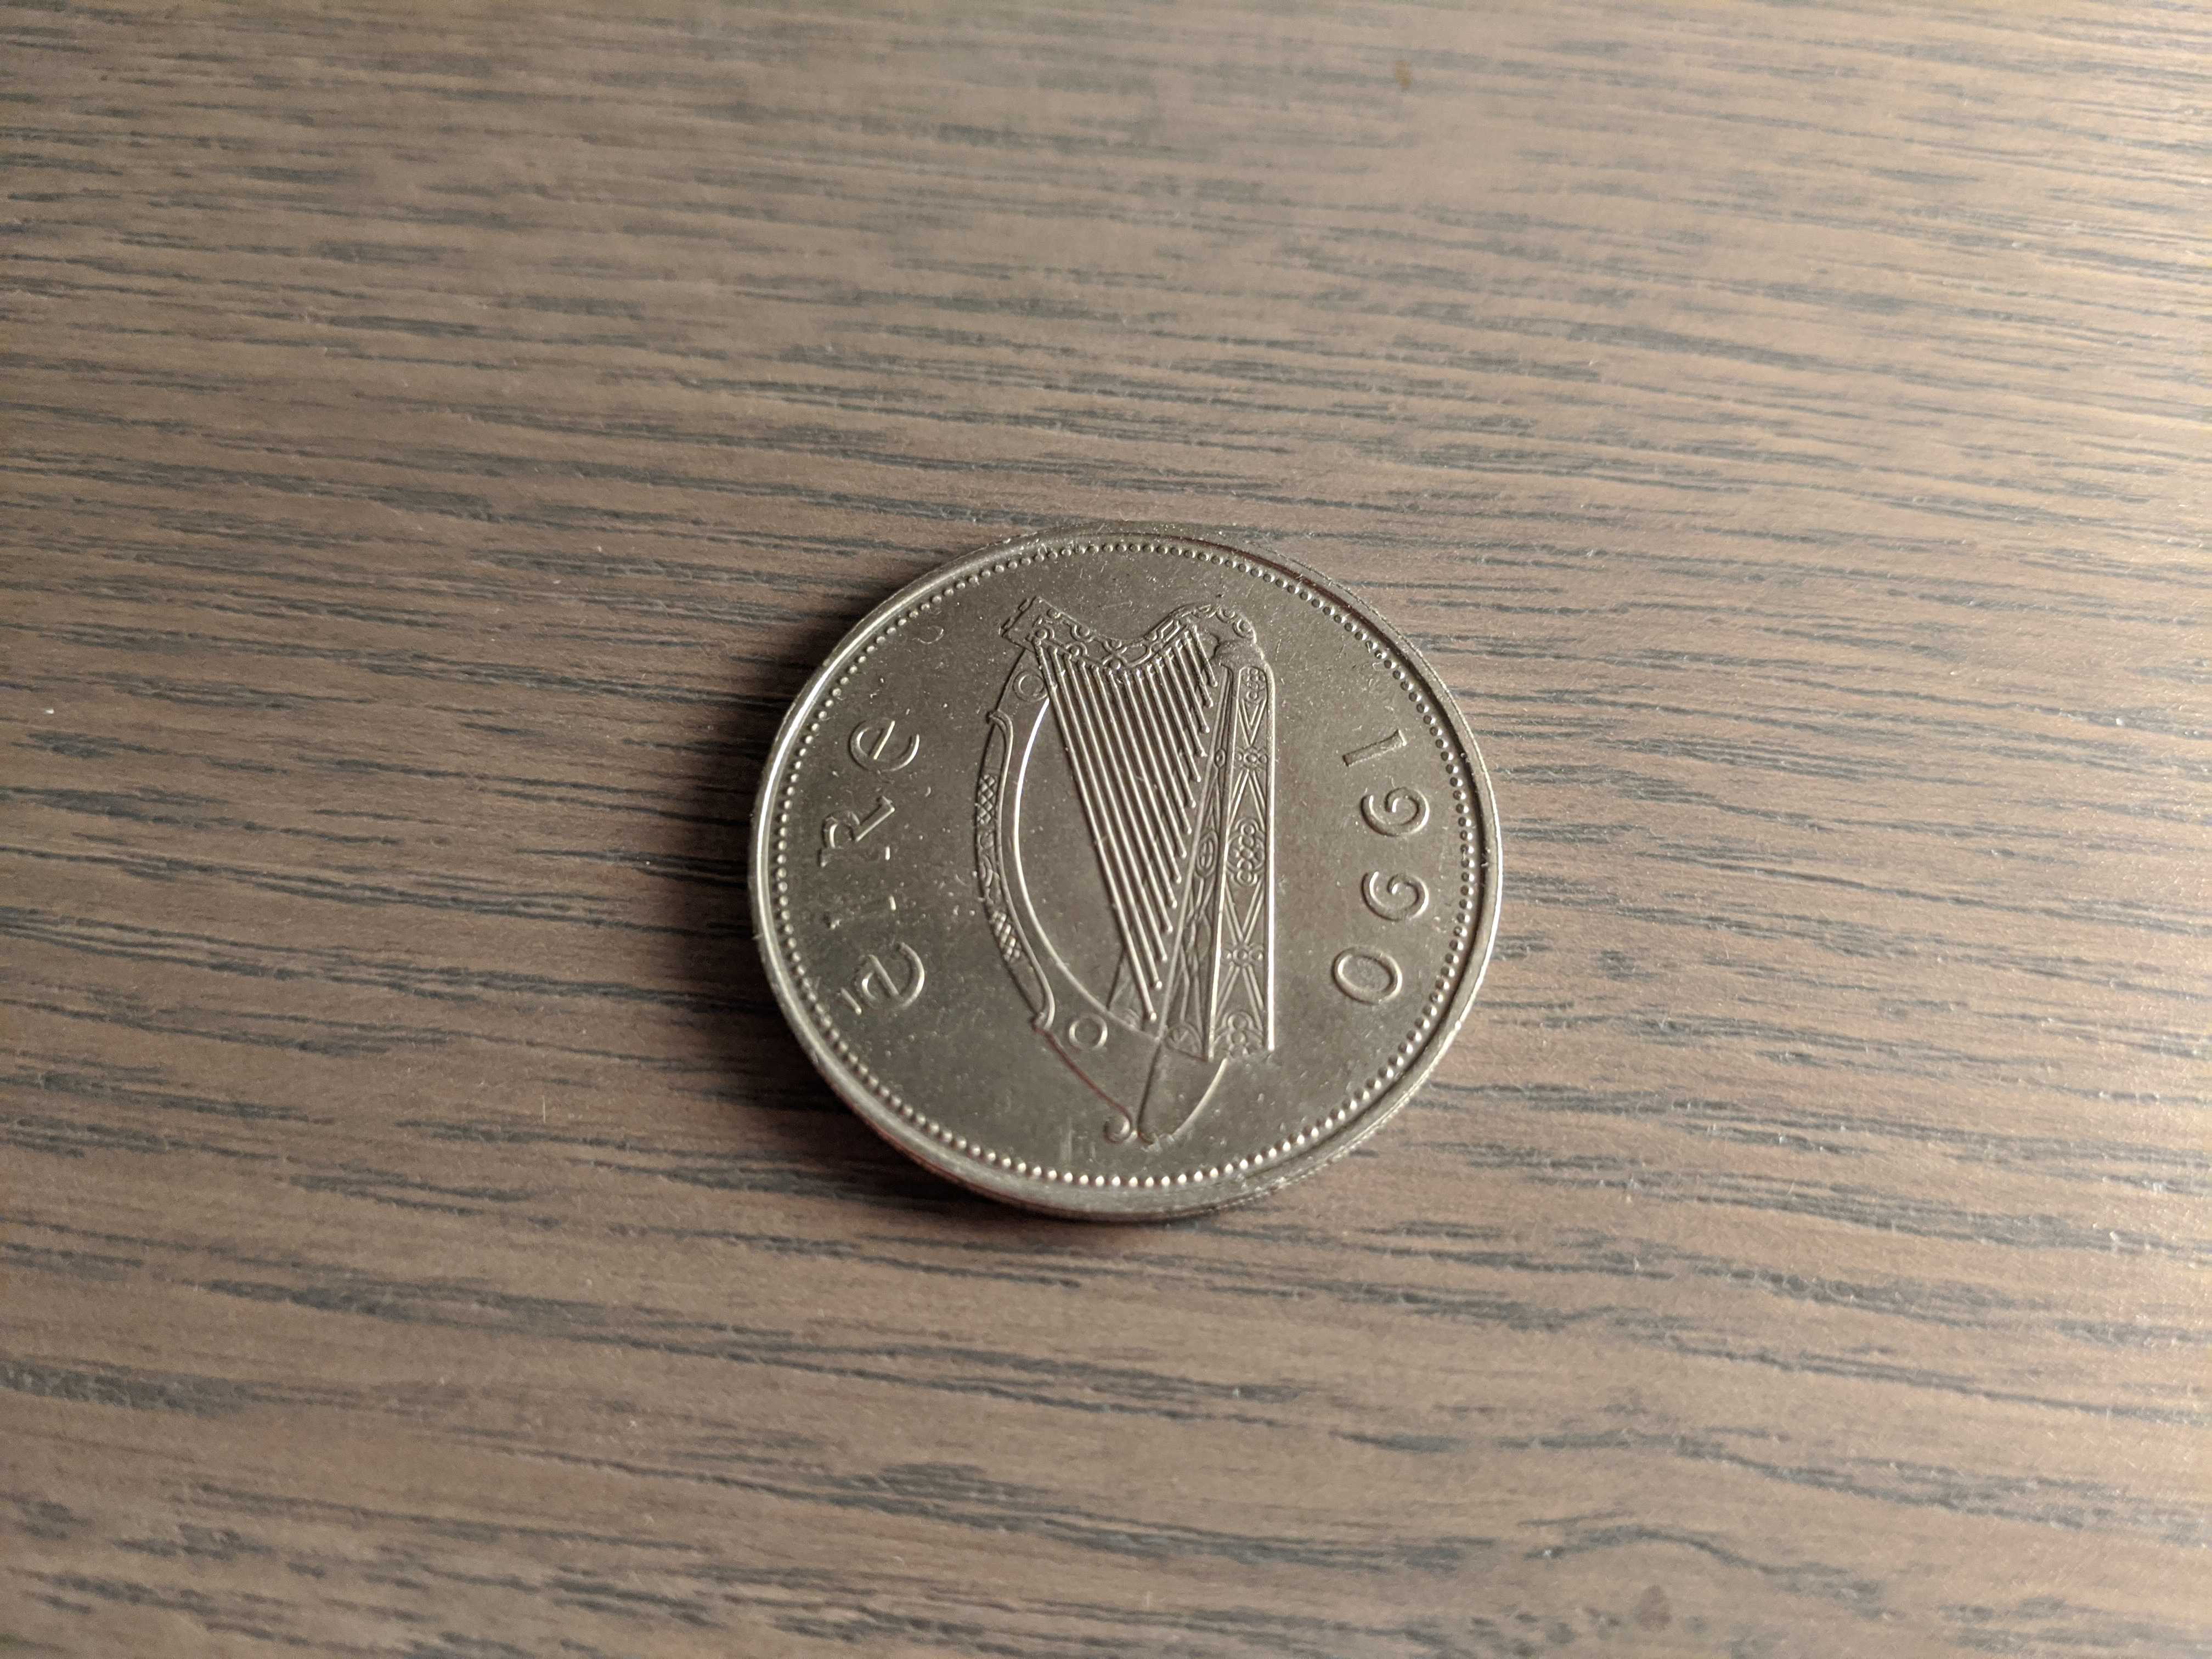 Tails side of the 1 pound Irish coin